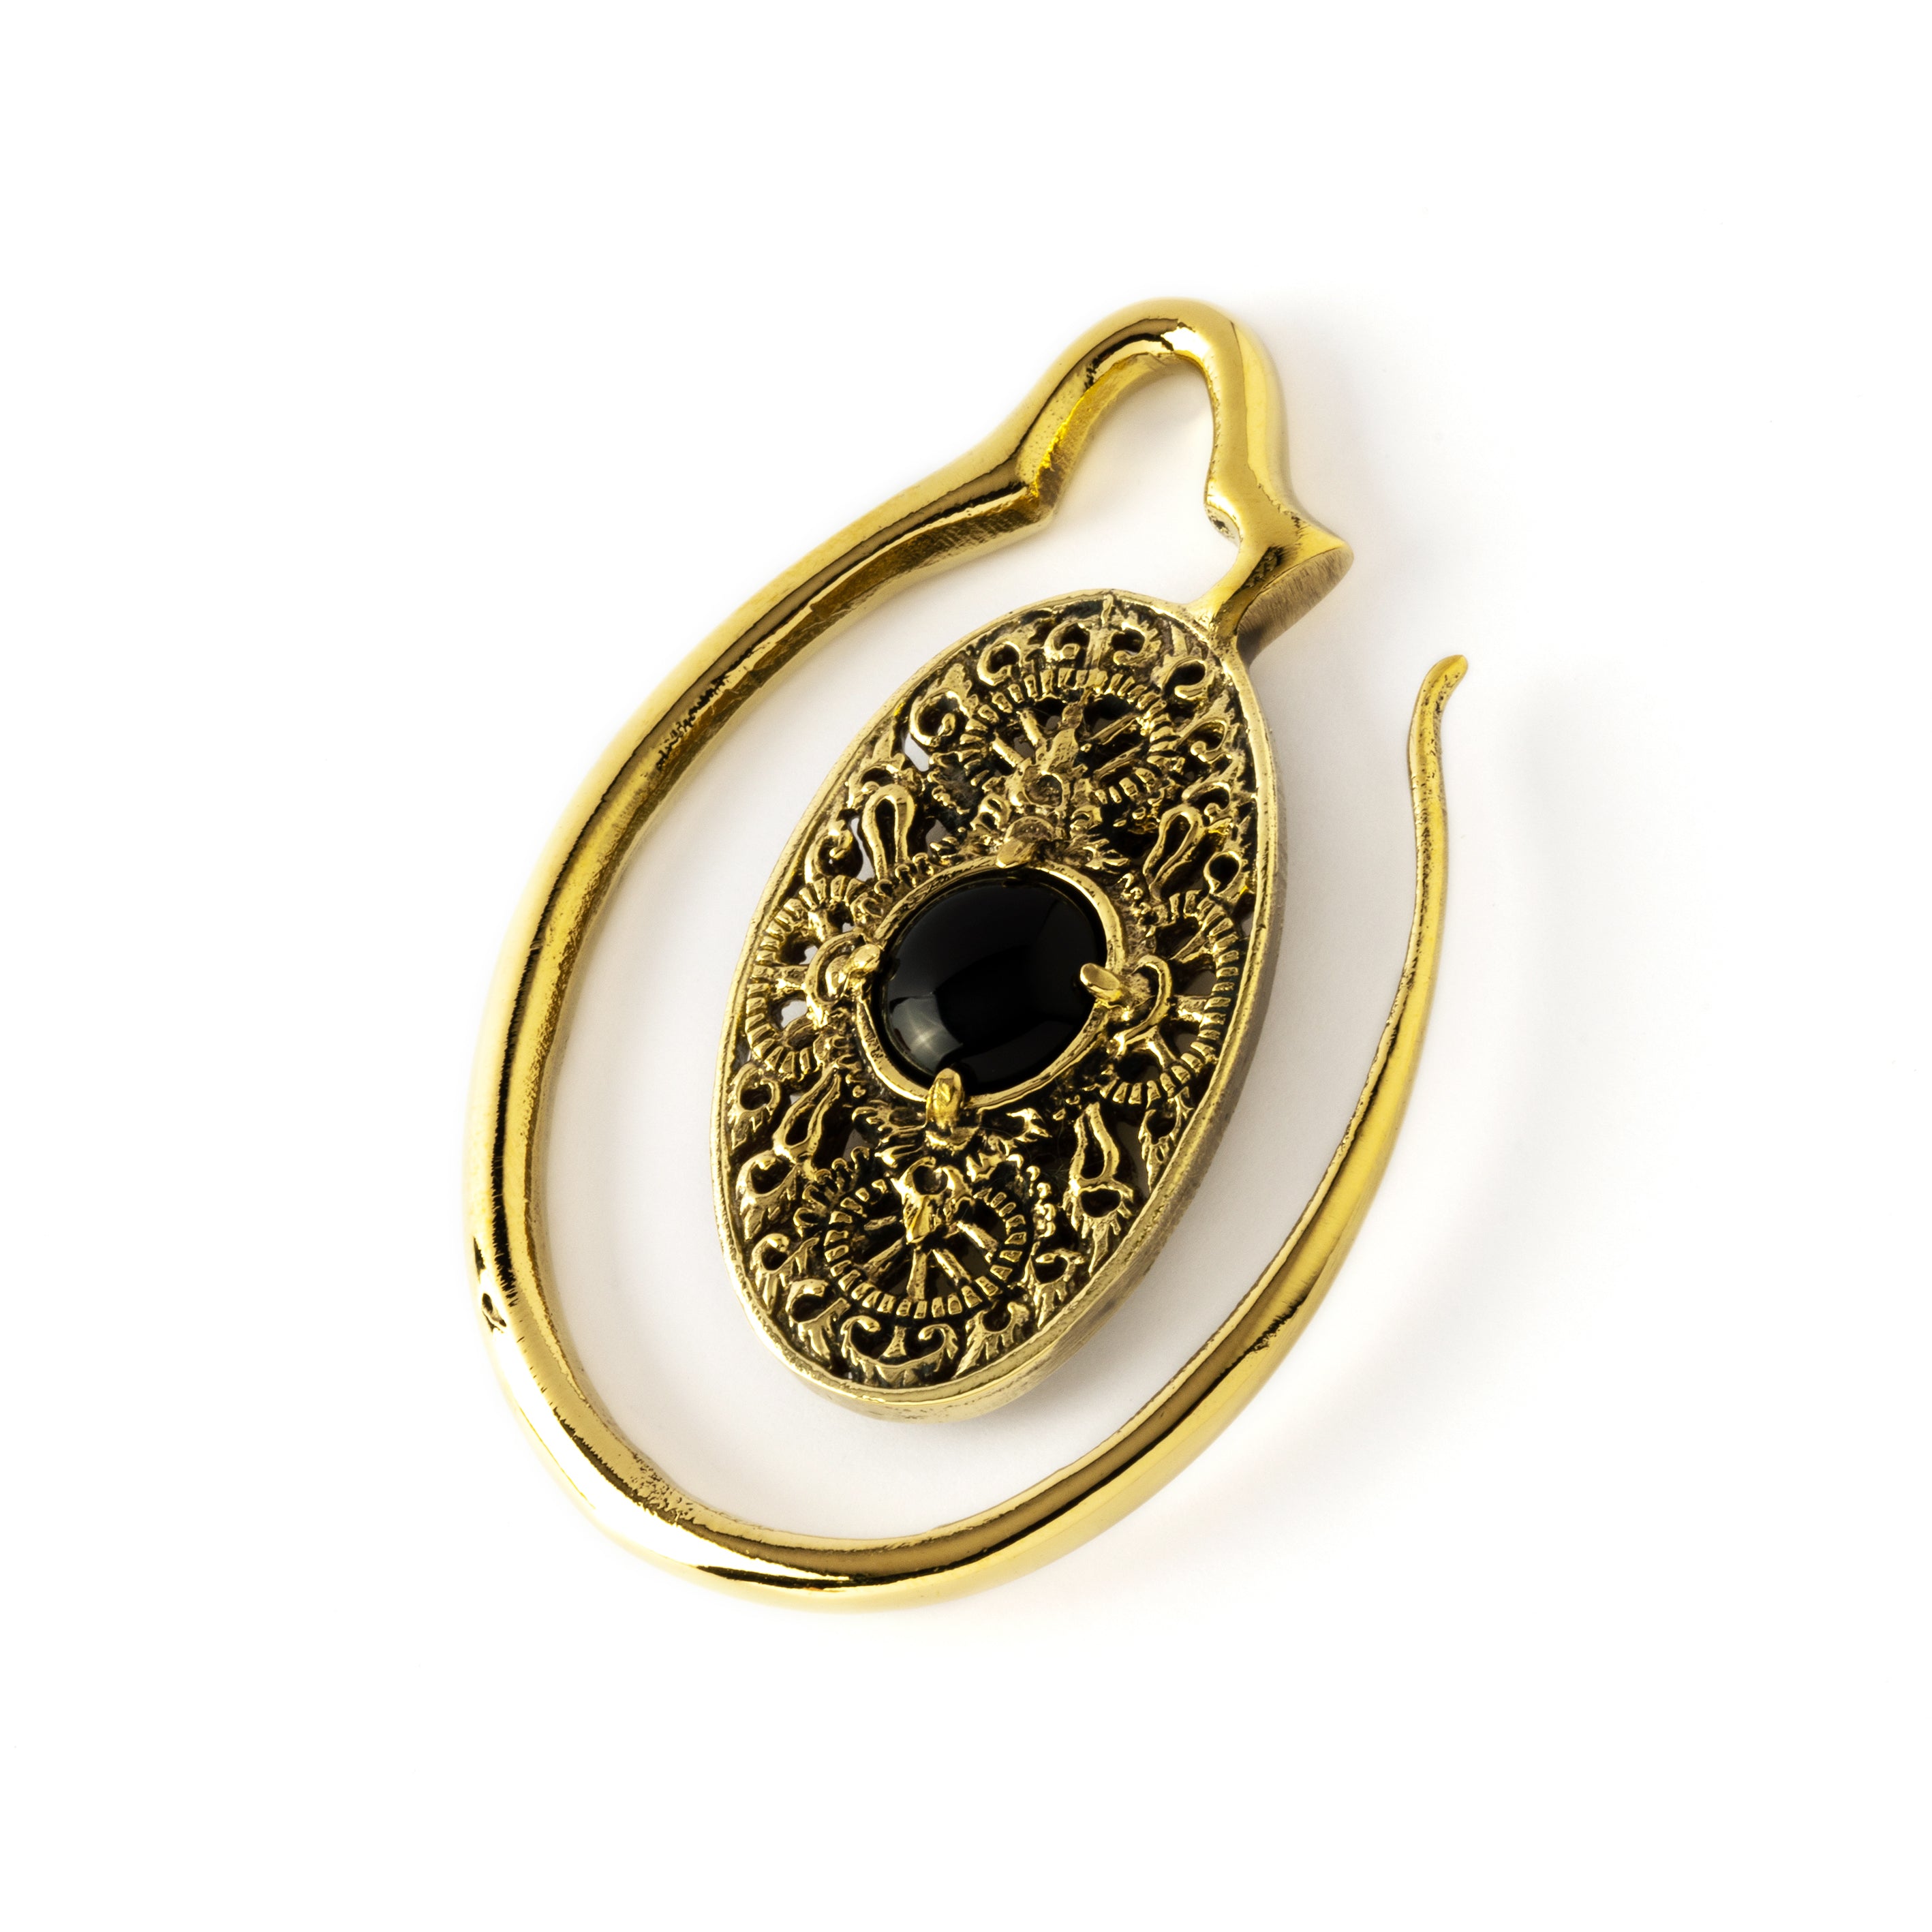 golden large ear weights hangers oval shaped with intricate filigree pattern an black onyx right view